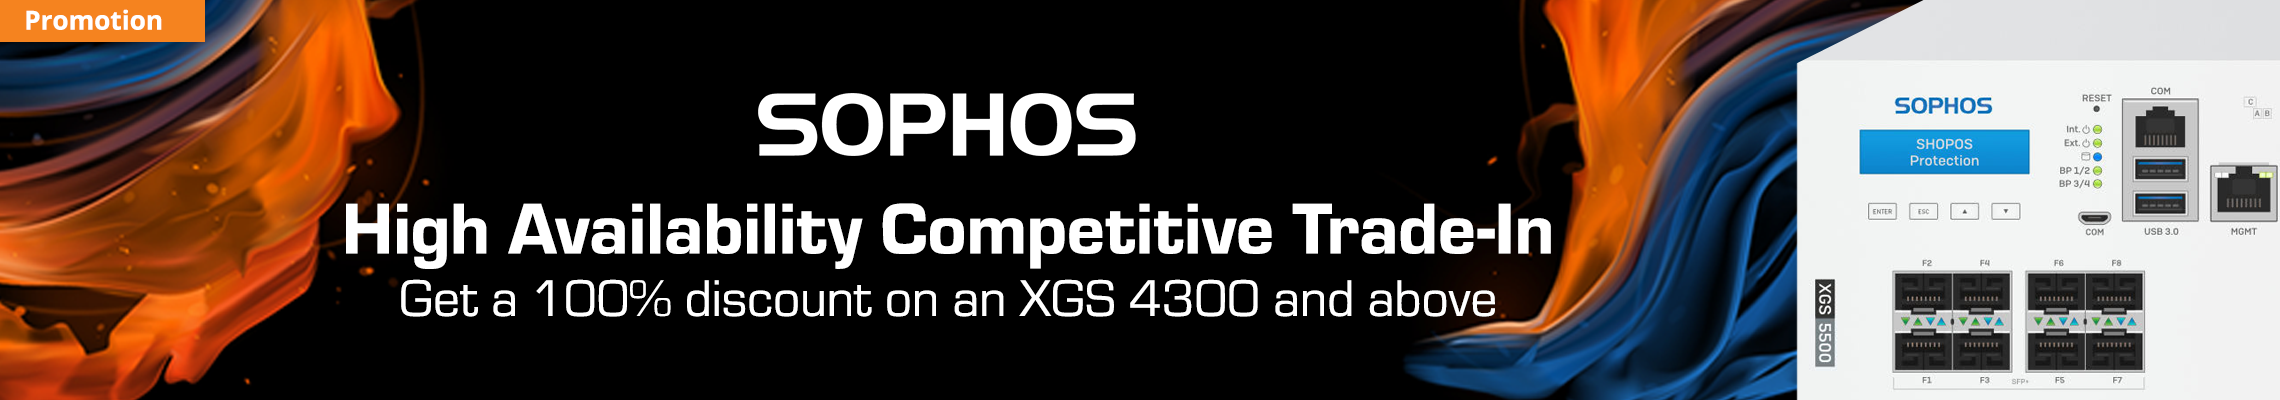 Sophos High Availability Competitive Trade-In